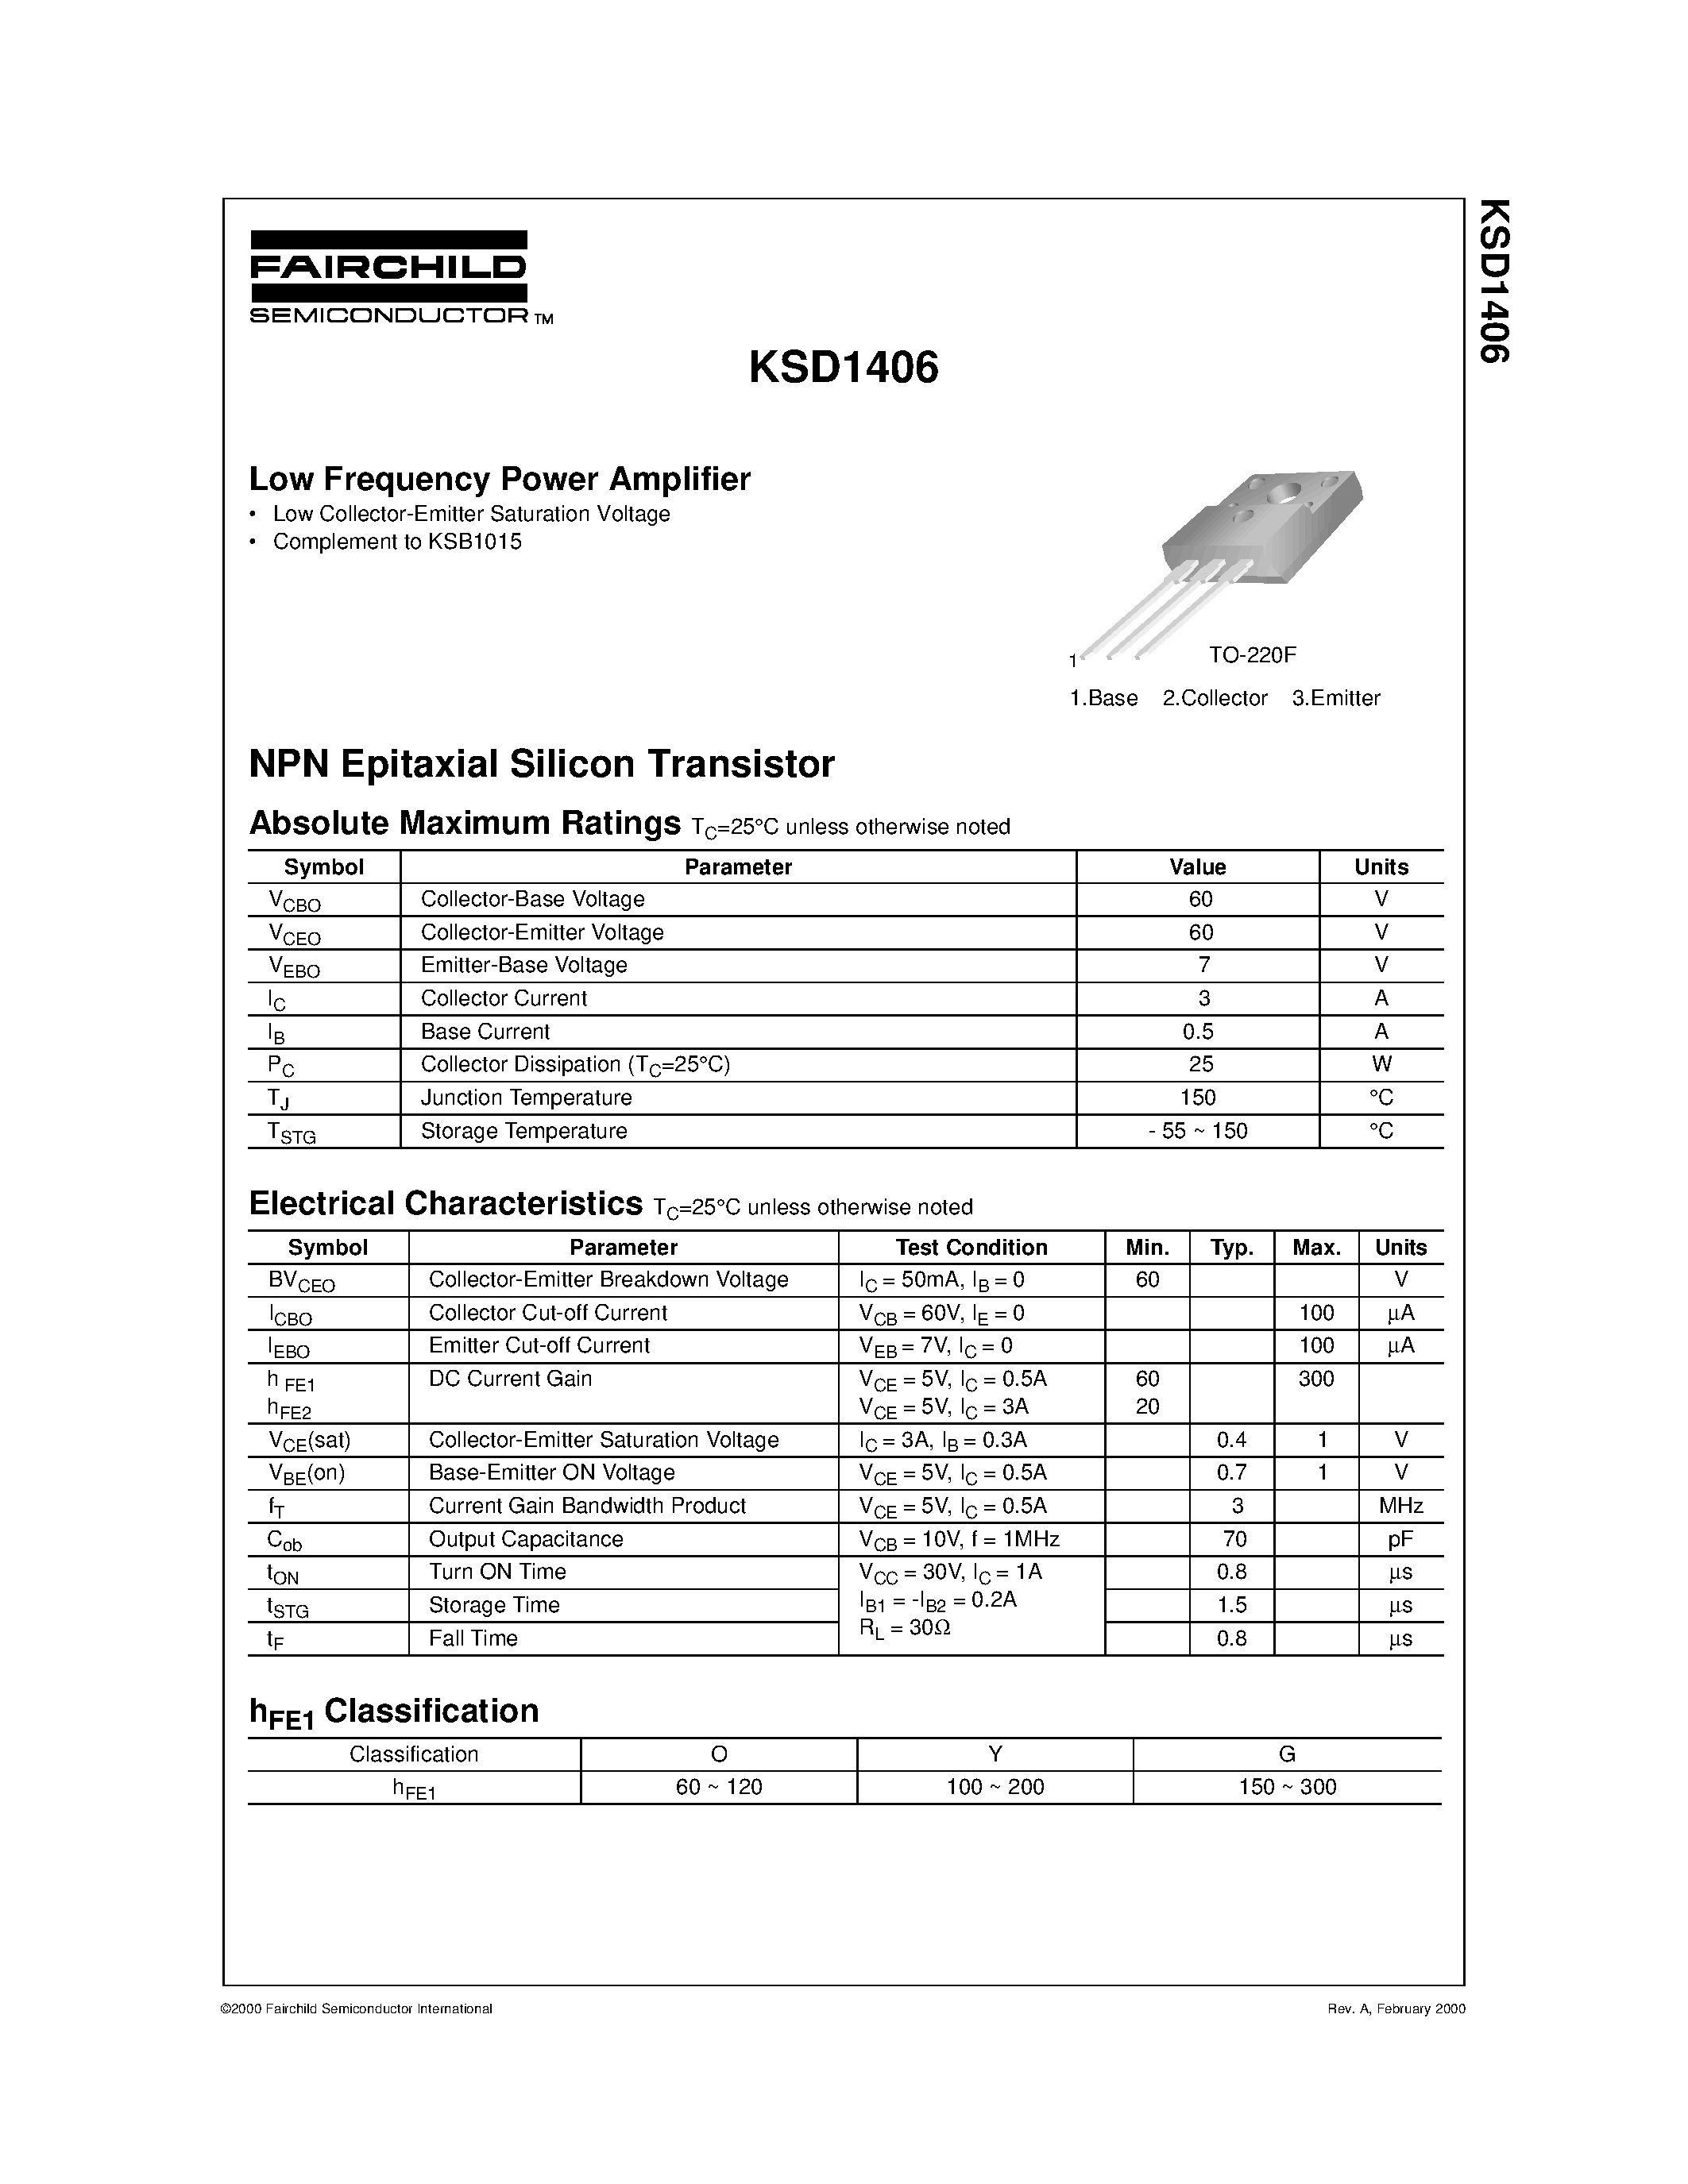 Datasheet KSD1406 - Low Frequency Power Amplifier page 1